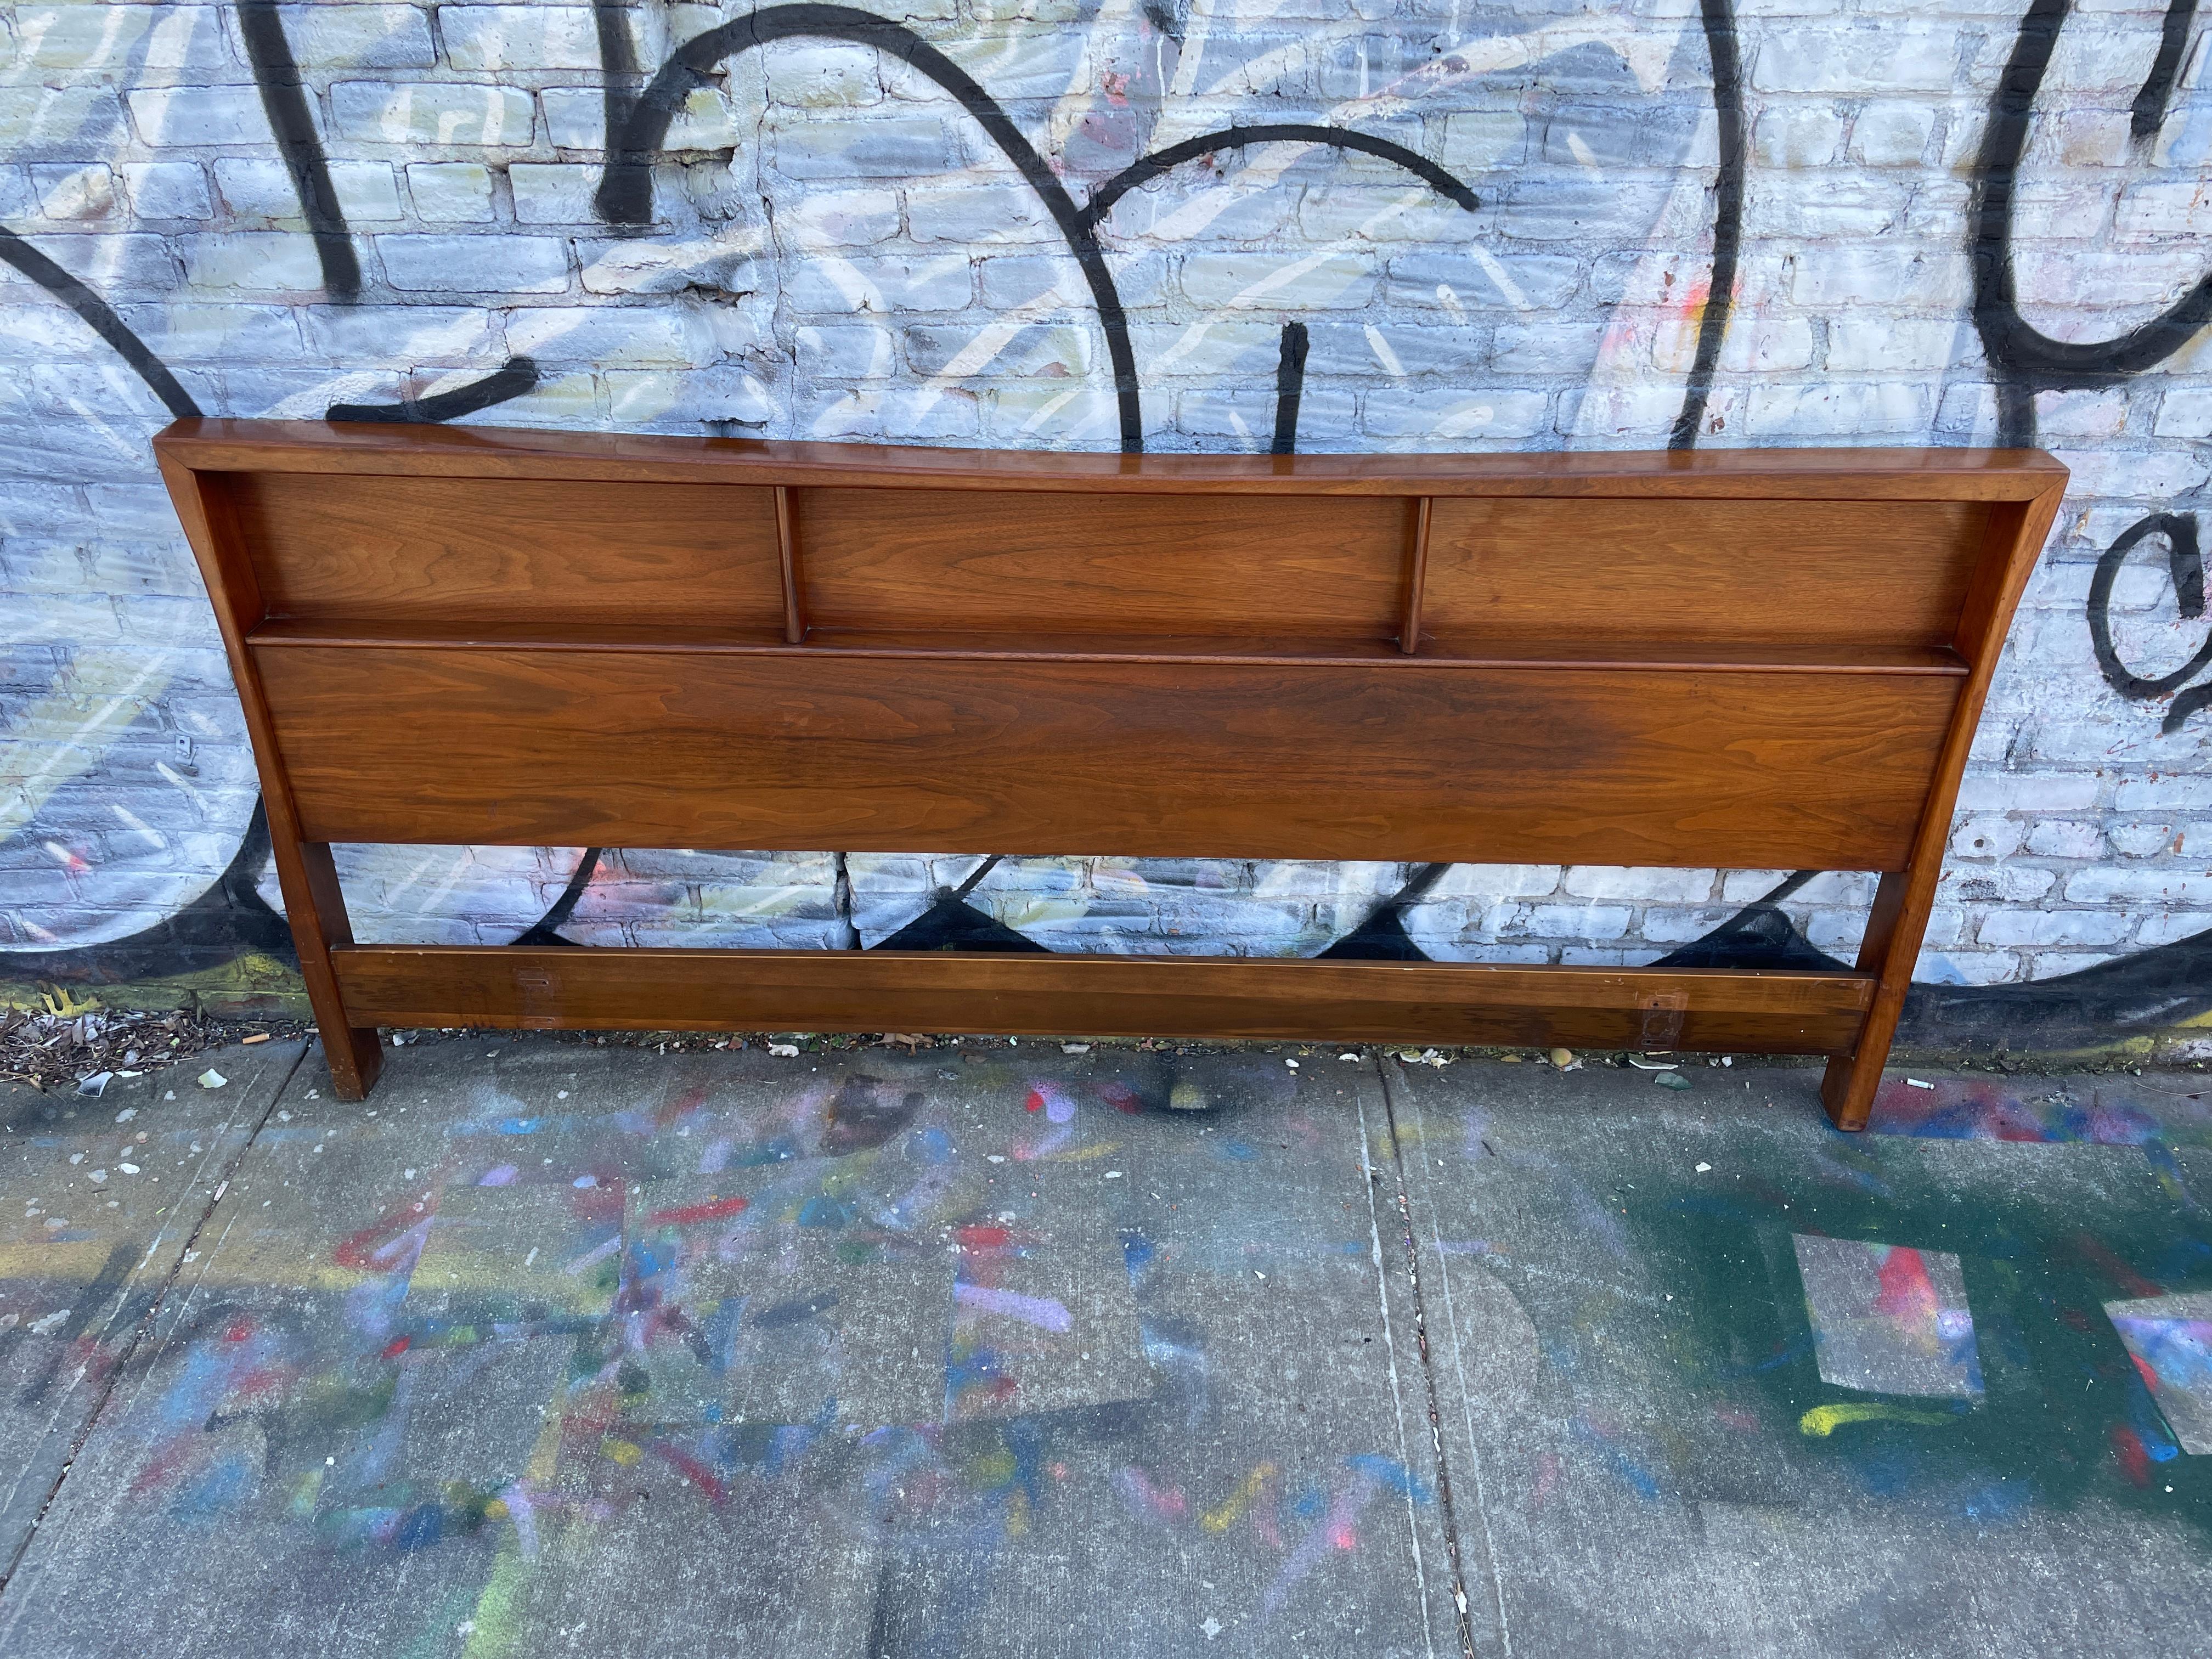 Beautiful American mid Century King bed headboard in excellent vintage condition with 3 narrow shelves - its perfect. finely crafted. Fits a King sized mattress. Bed Headboard only NO metal bed Frame. Easily mounts to all bed frames. Numbered on